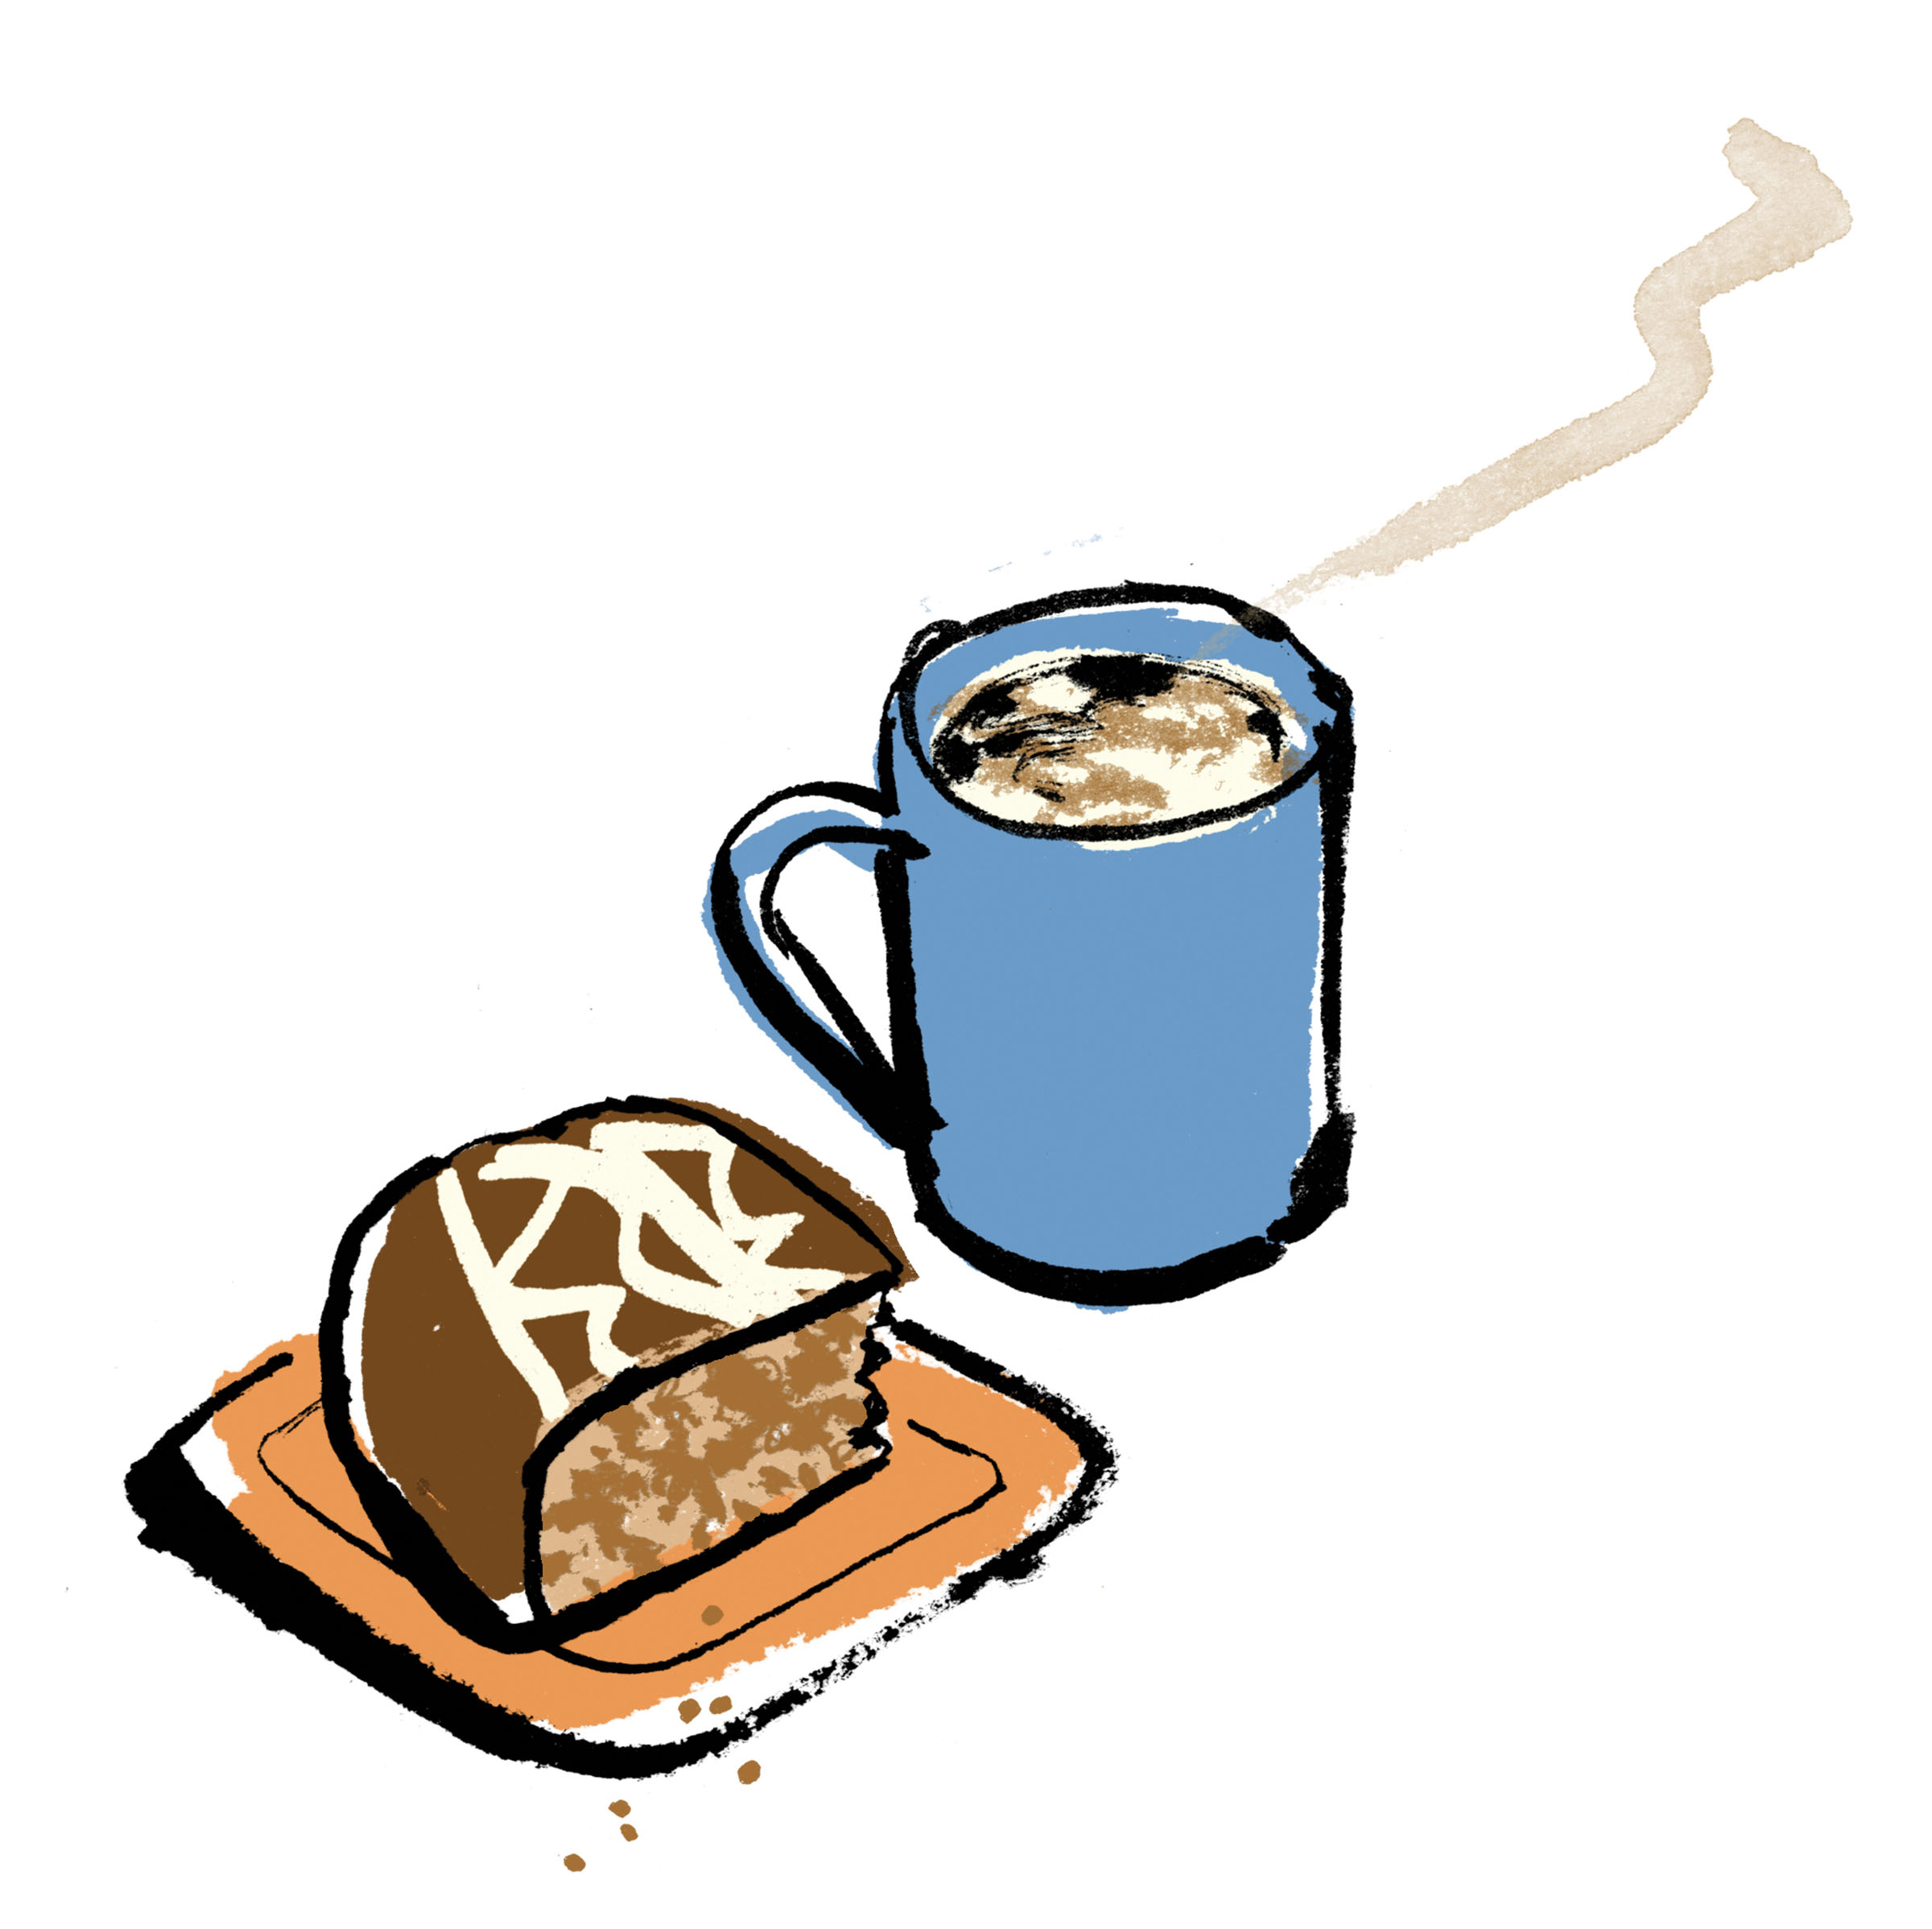 An illustration of a steaming mug of coffee and a pastry